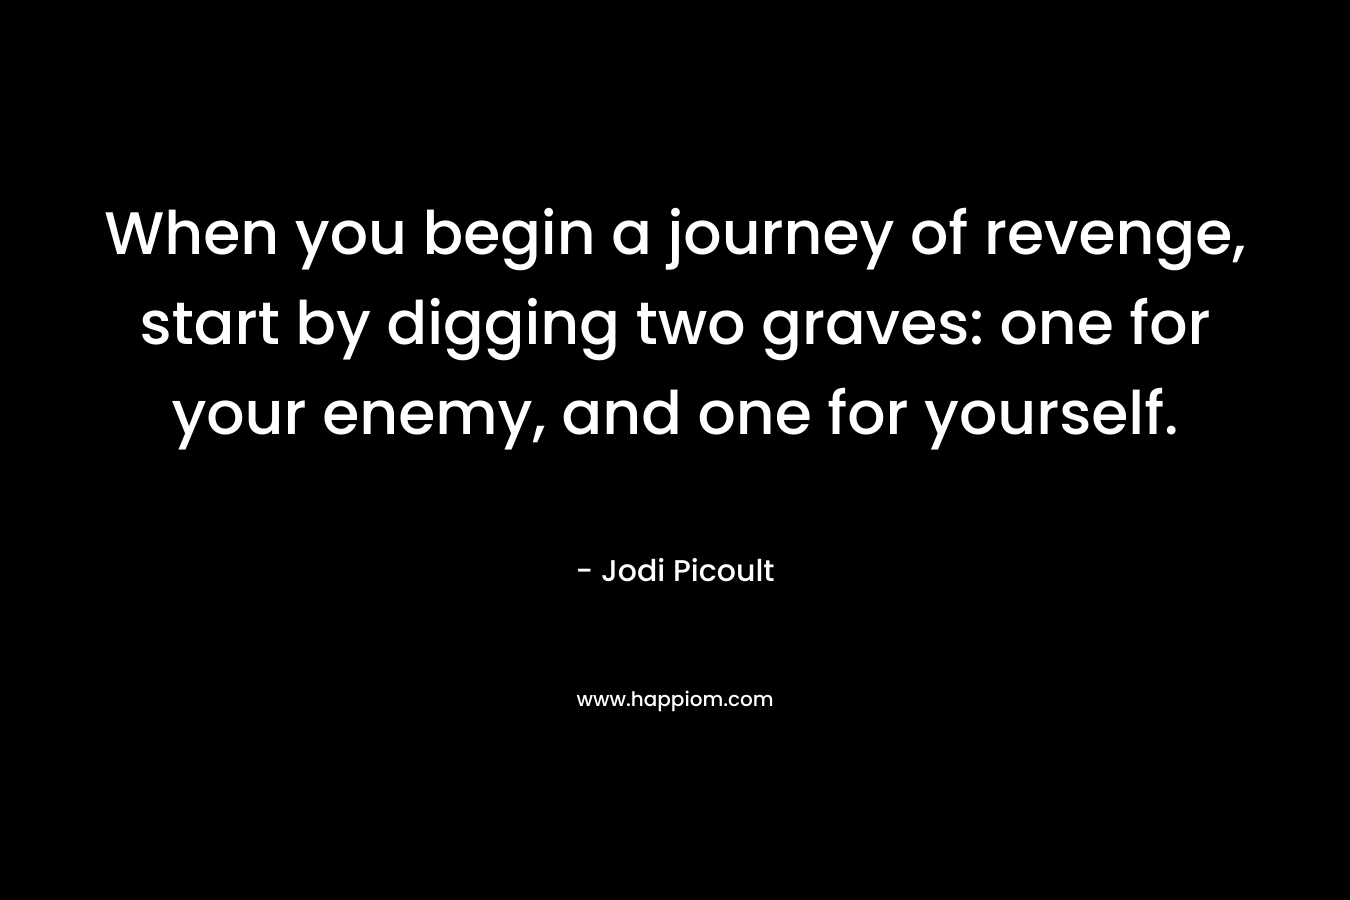 When you begin a journey of revenge, start by digging two graves: one for your enemy, and one for yourself. – Jodi Picoult